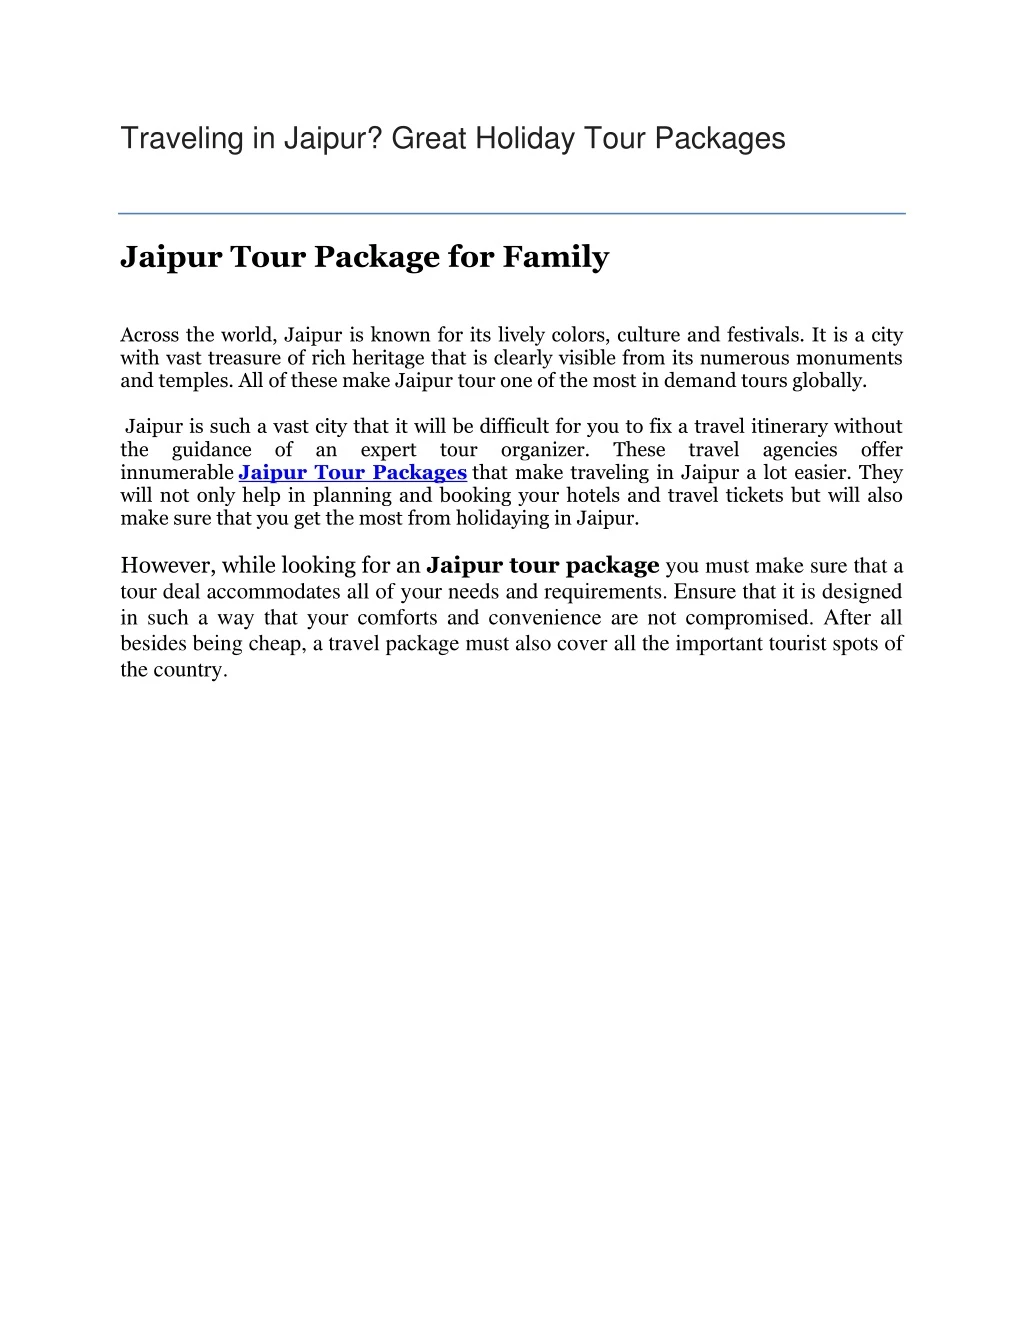 traveling in jaipur great holiday tour packages